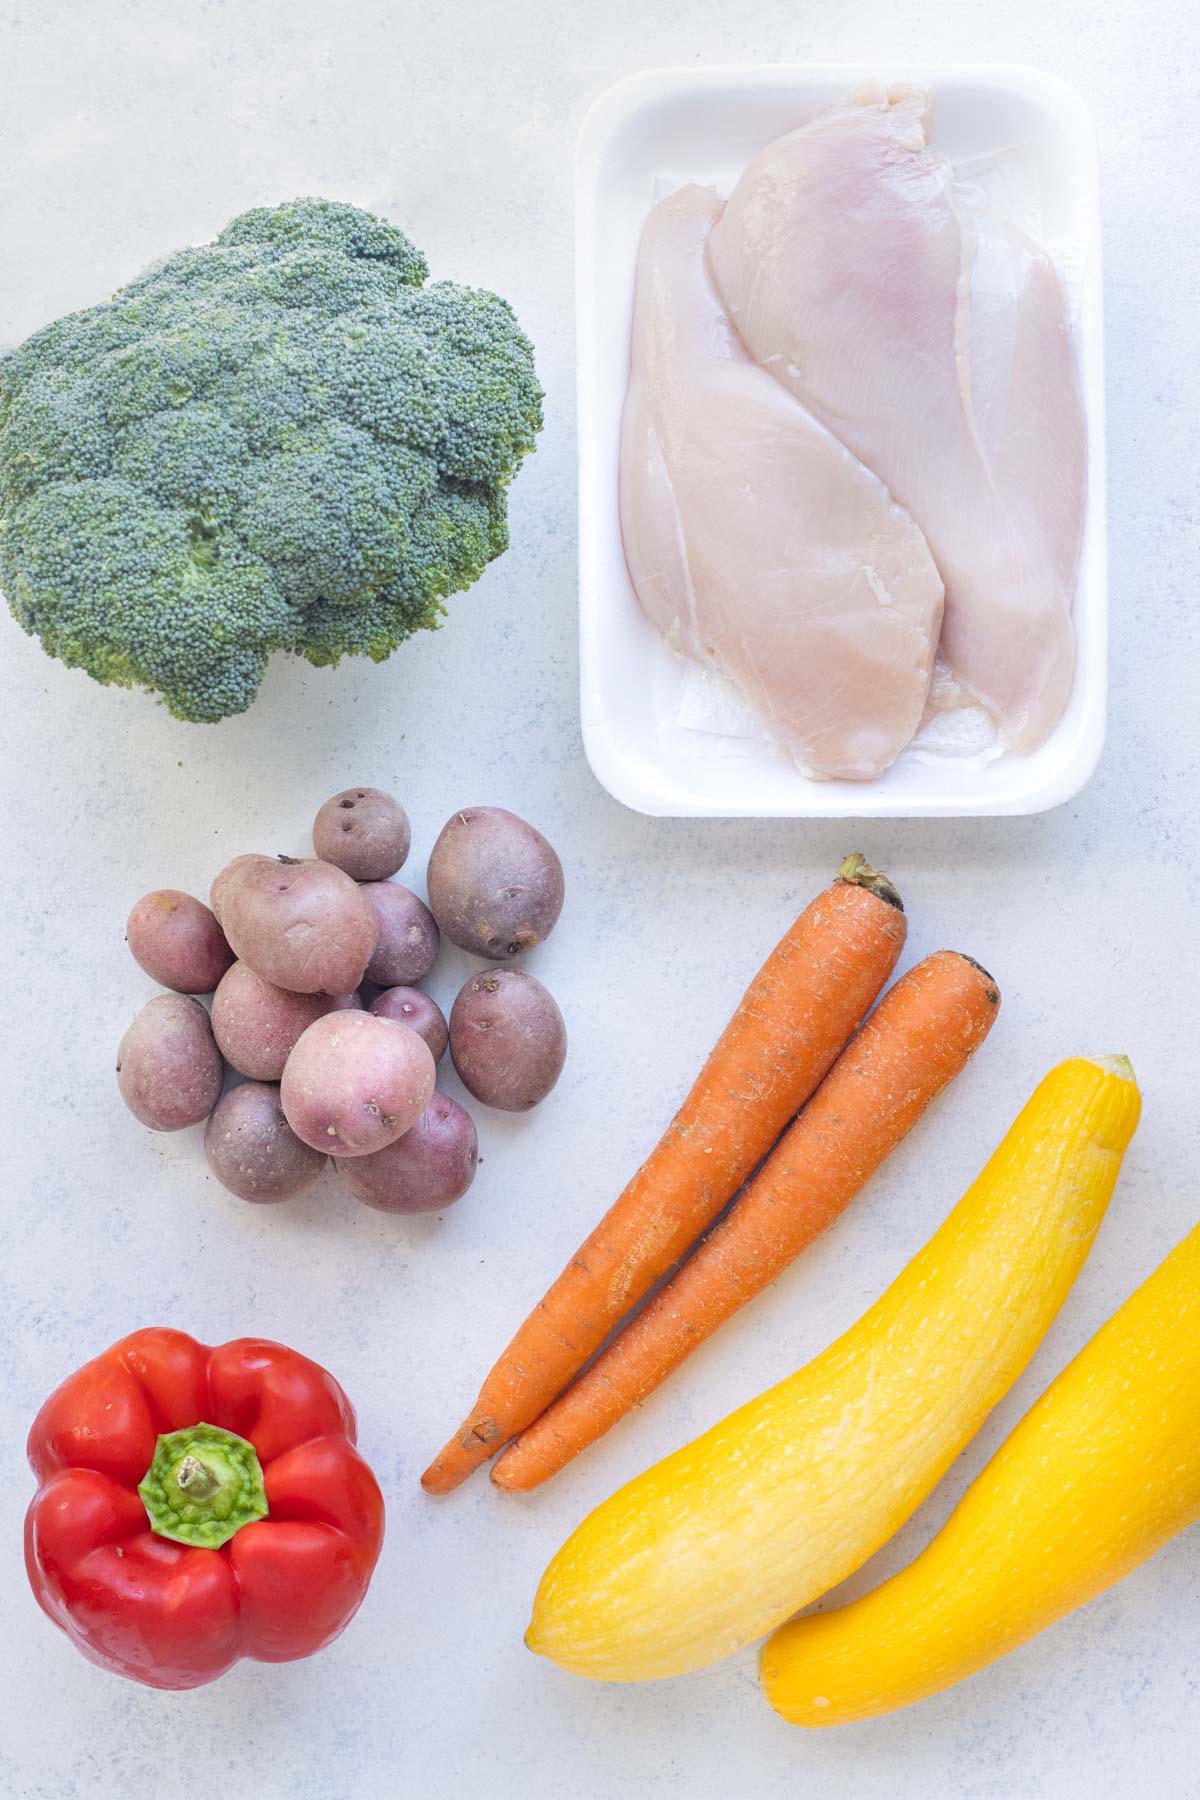 Chicken, broccoli, potatoes, carrots, squash, and red peppers are the ingredients for this dish.